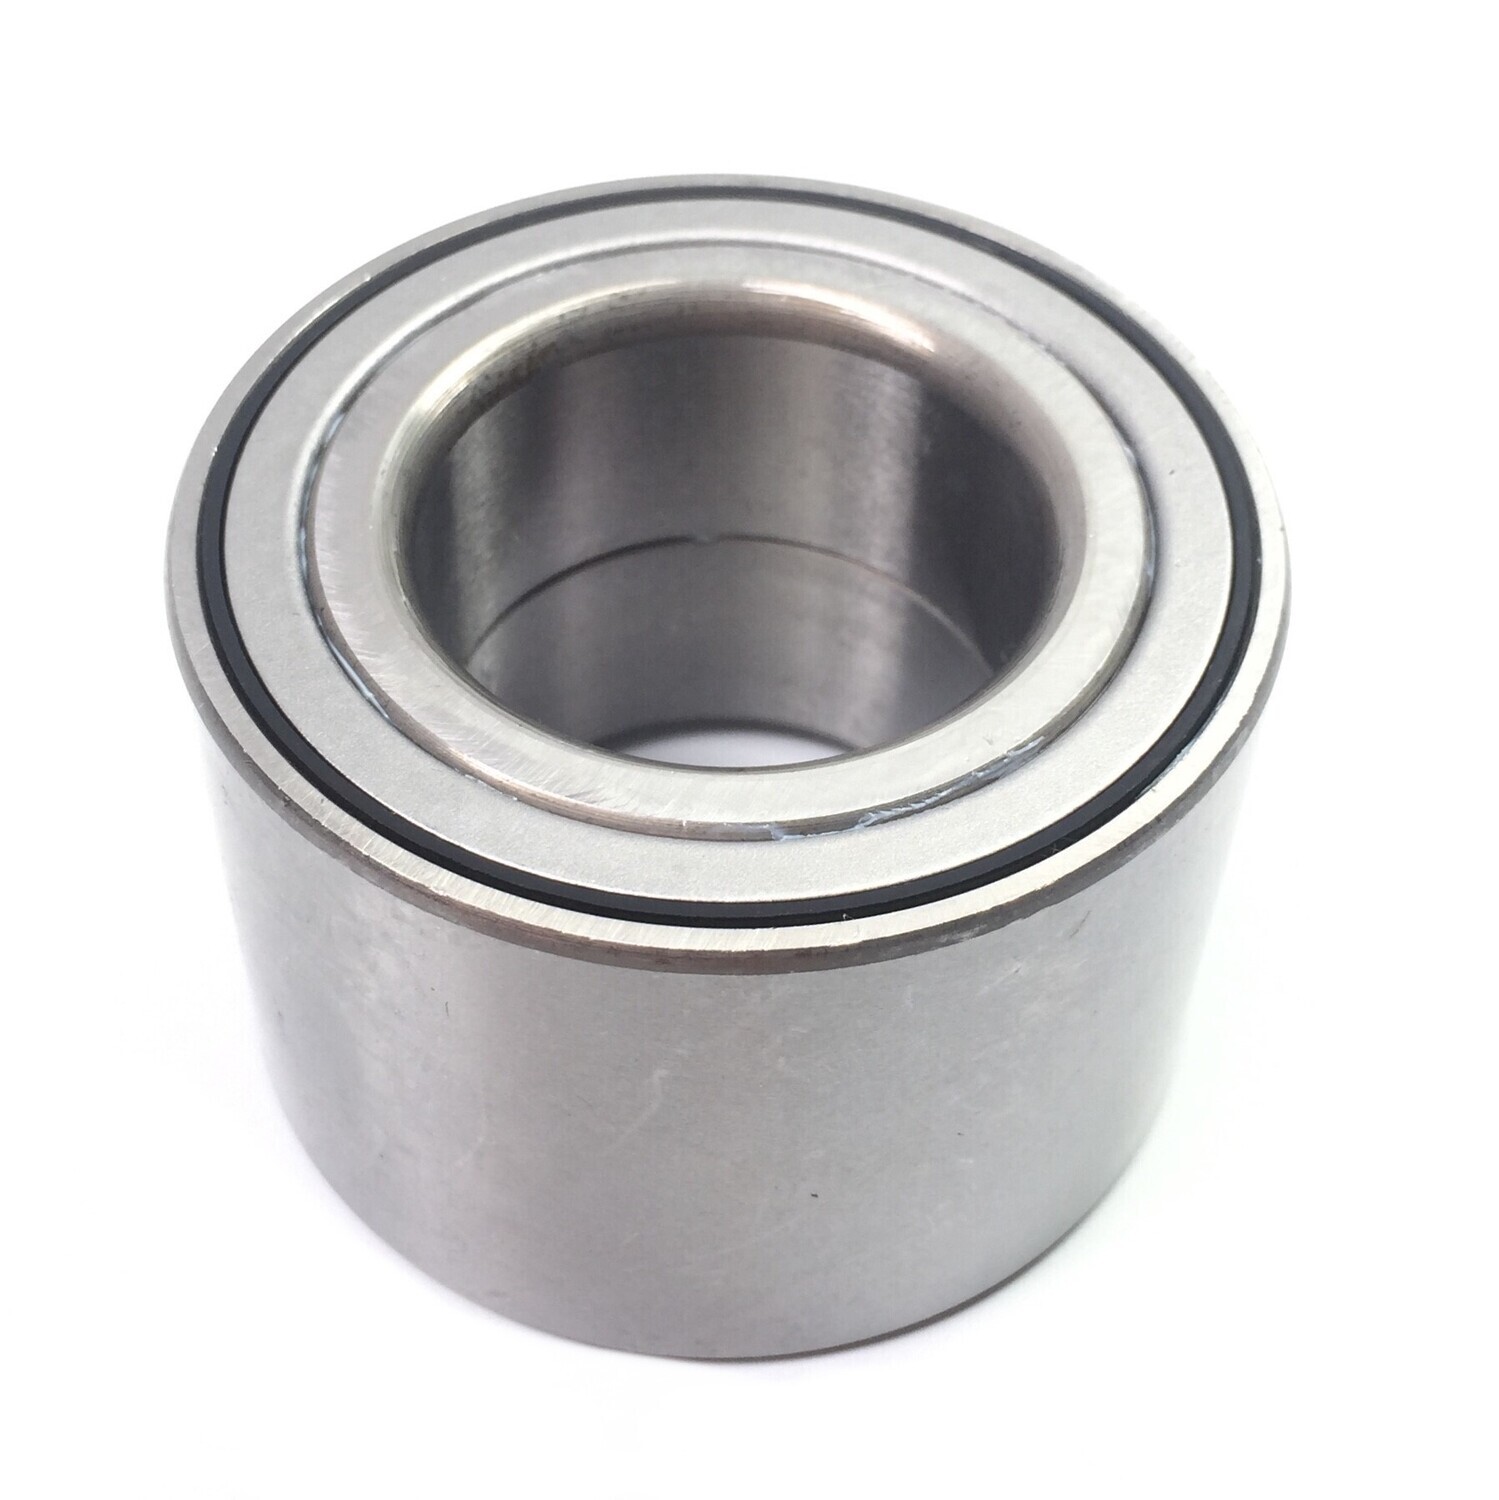 Front Wheel Axle Bearing Fits Suzuki Carry Every DA32W DB52T DB52V DA62T DA62V DA62W DA63T DA64V DA64W DA65T 4WD